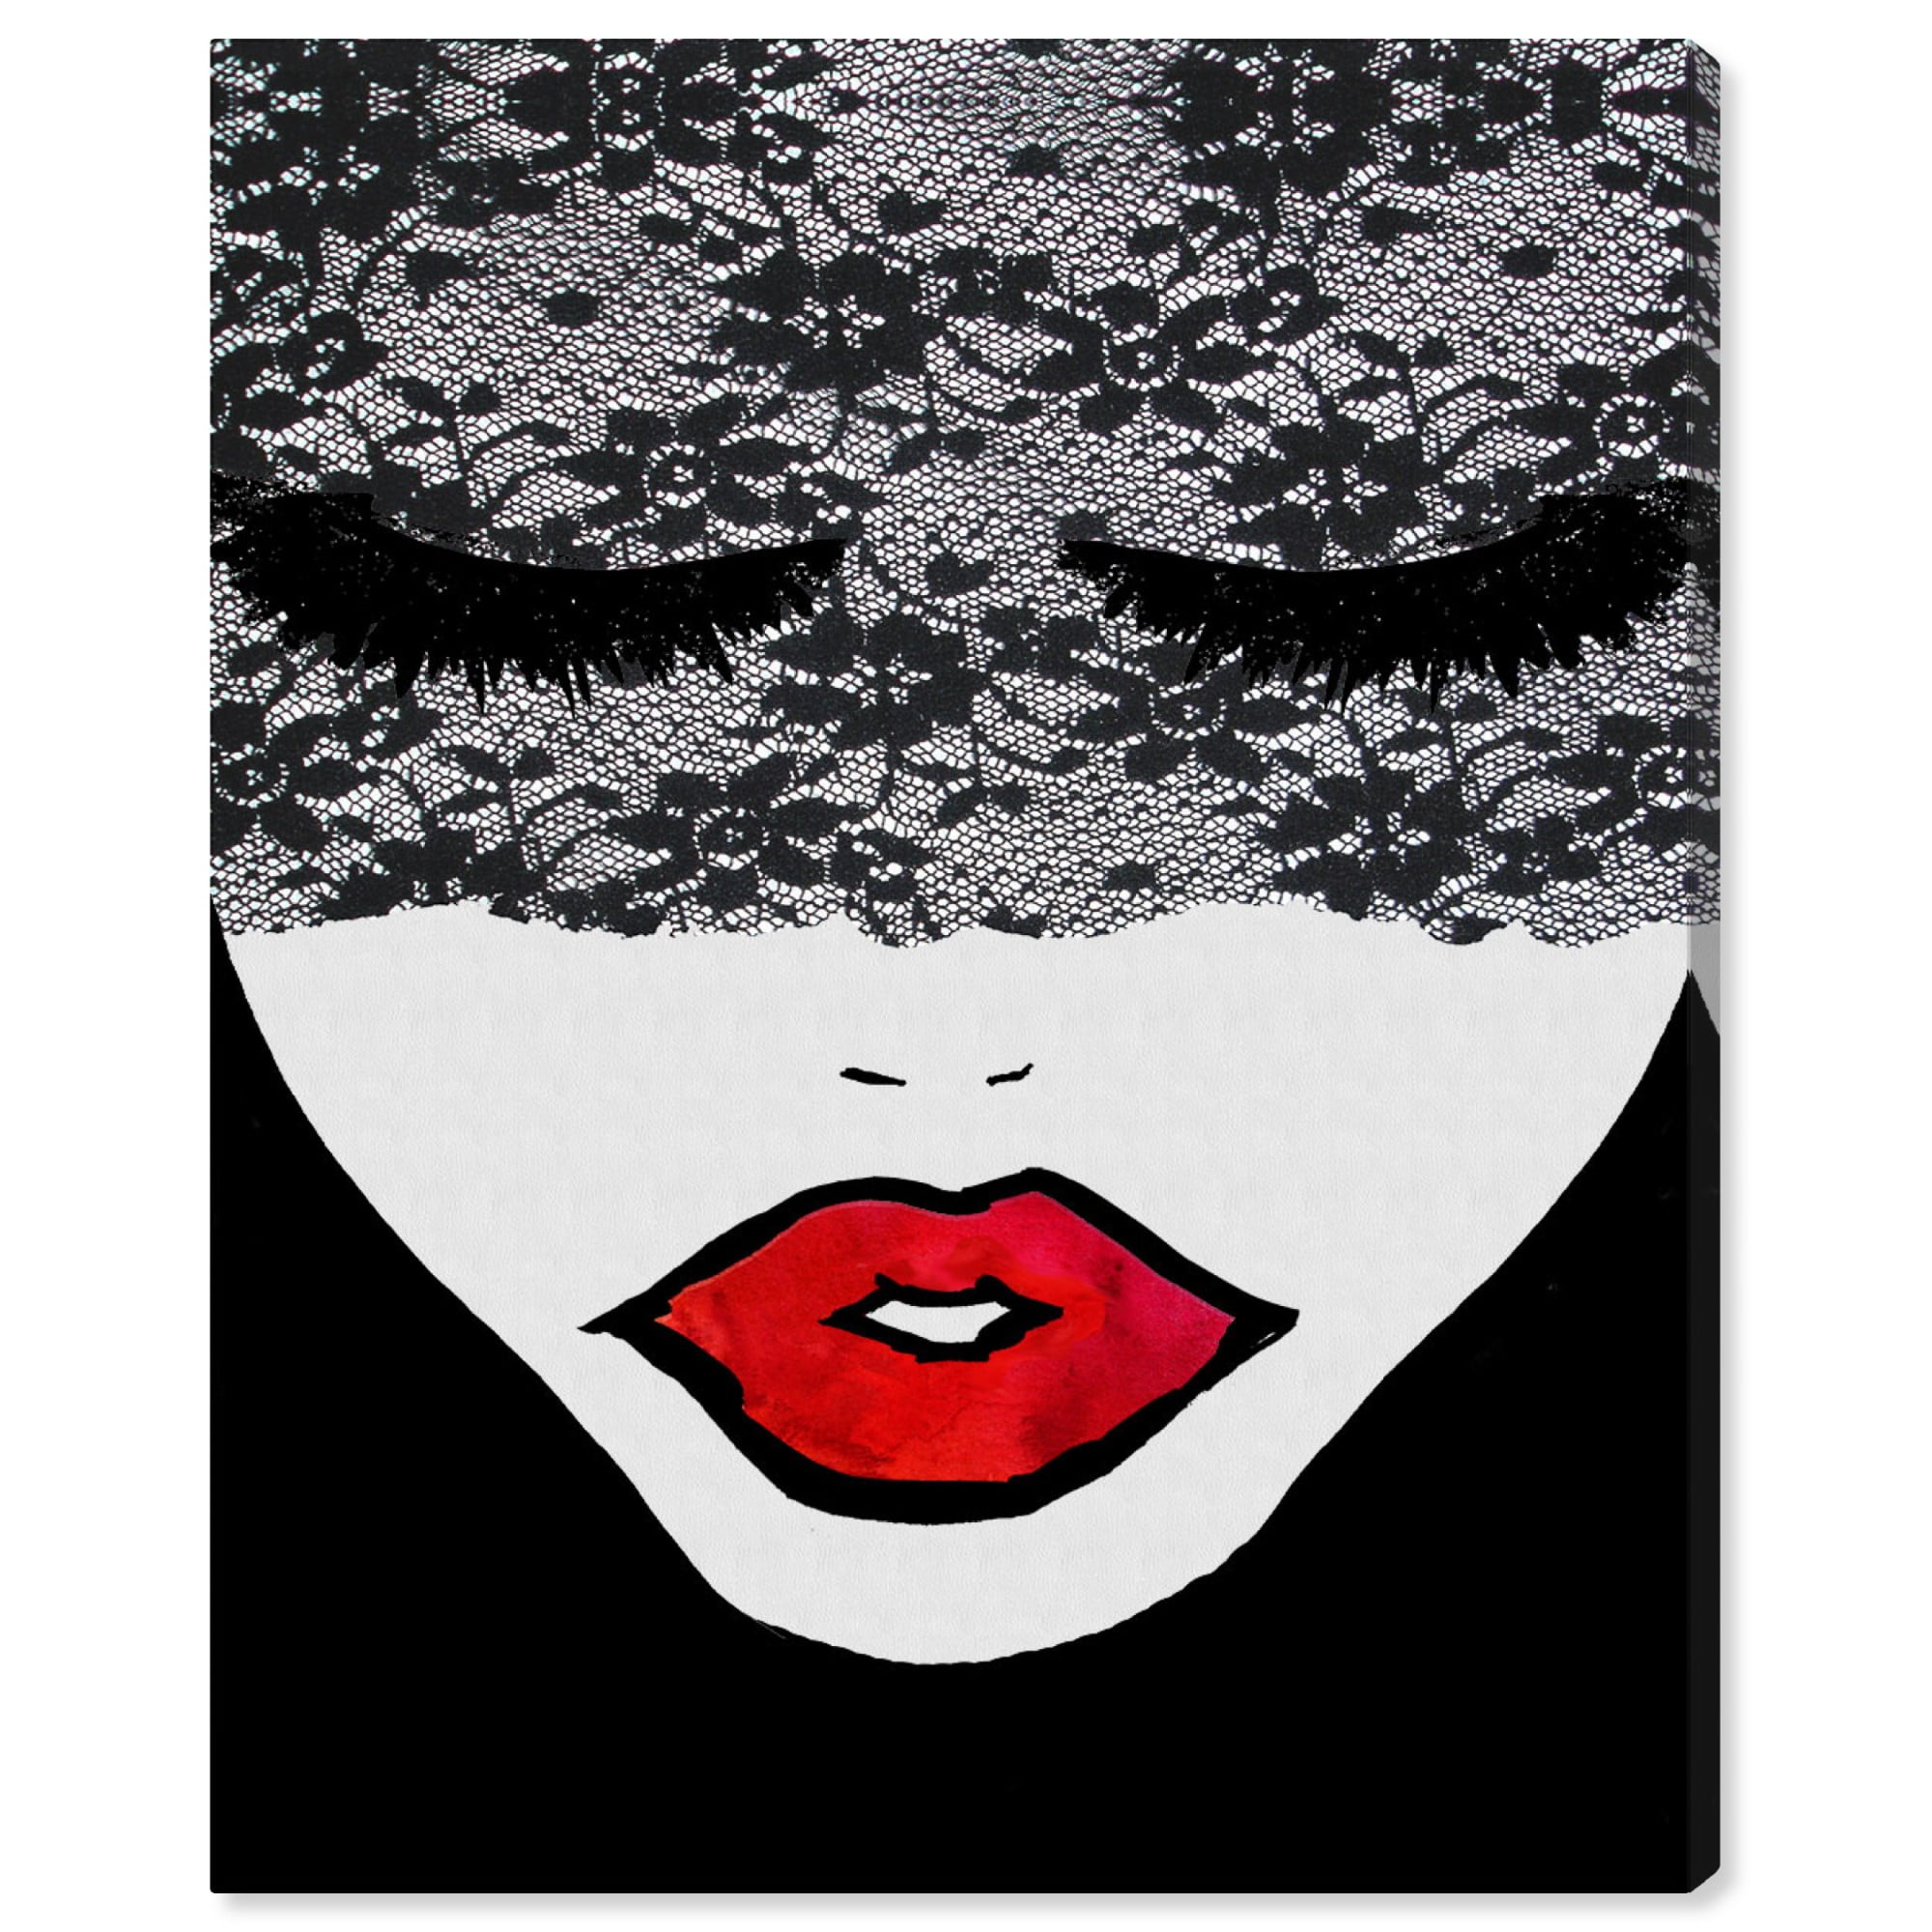 Fashion and Glam Noir and Blush Lips - Graphic Art Print Willa Arlo Interiors Format: Black Framed Canvas, Size: 24 H x 24 W x 1.5 D